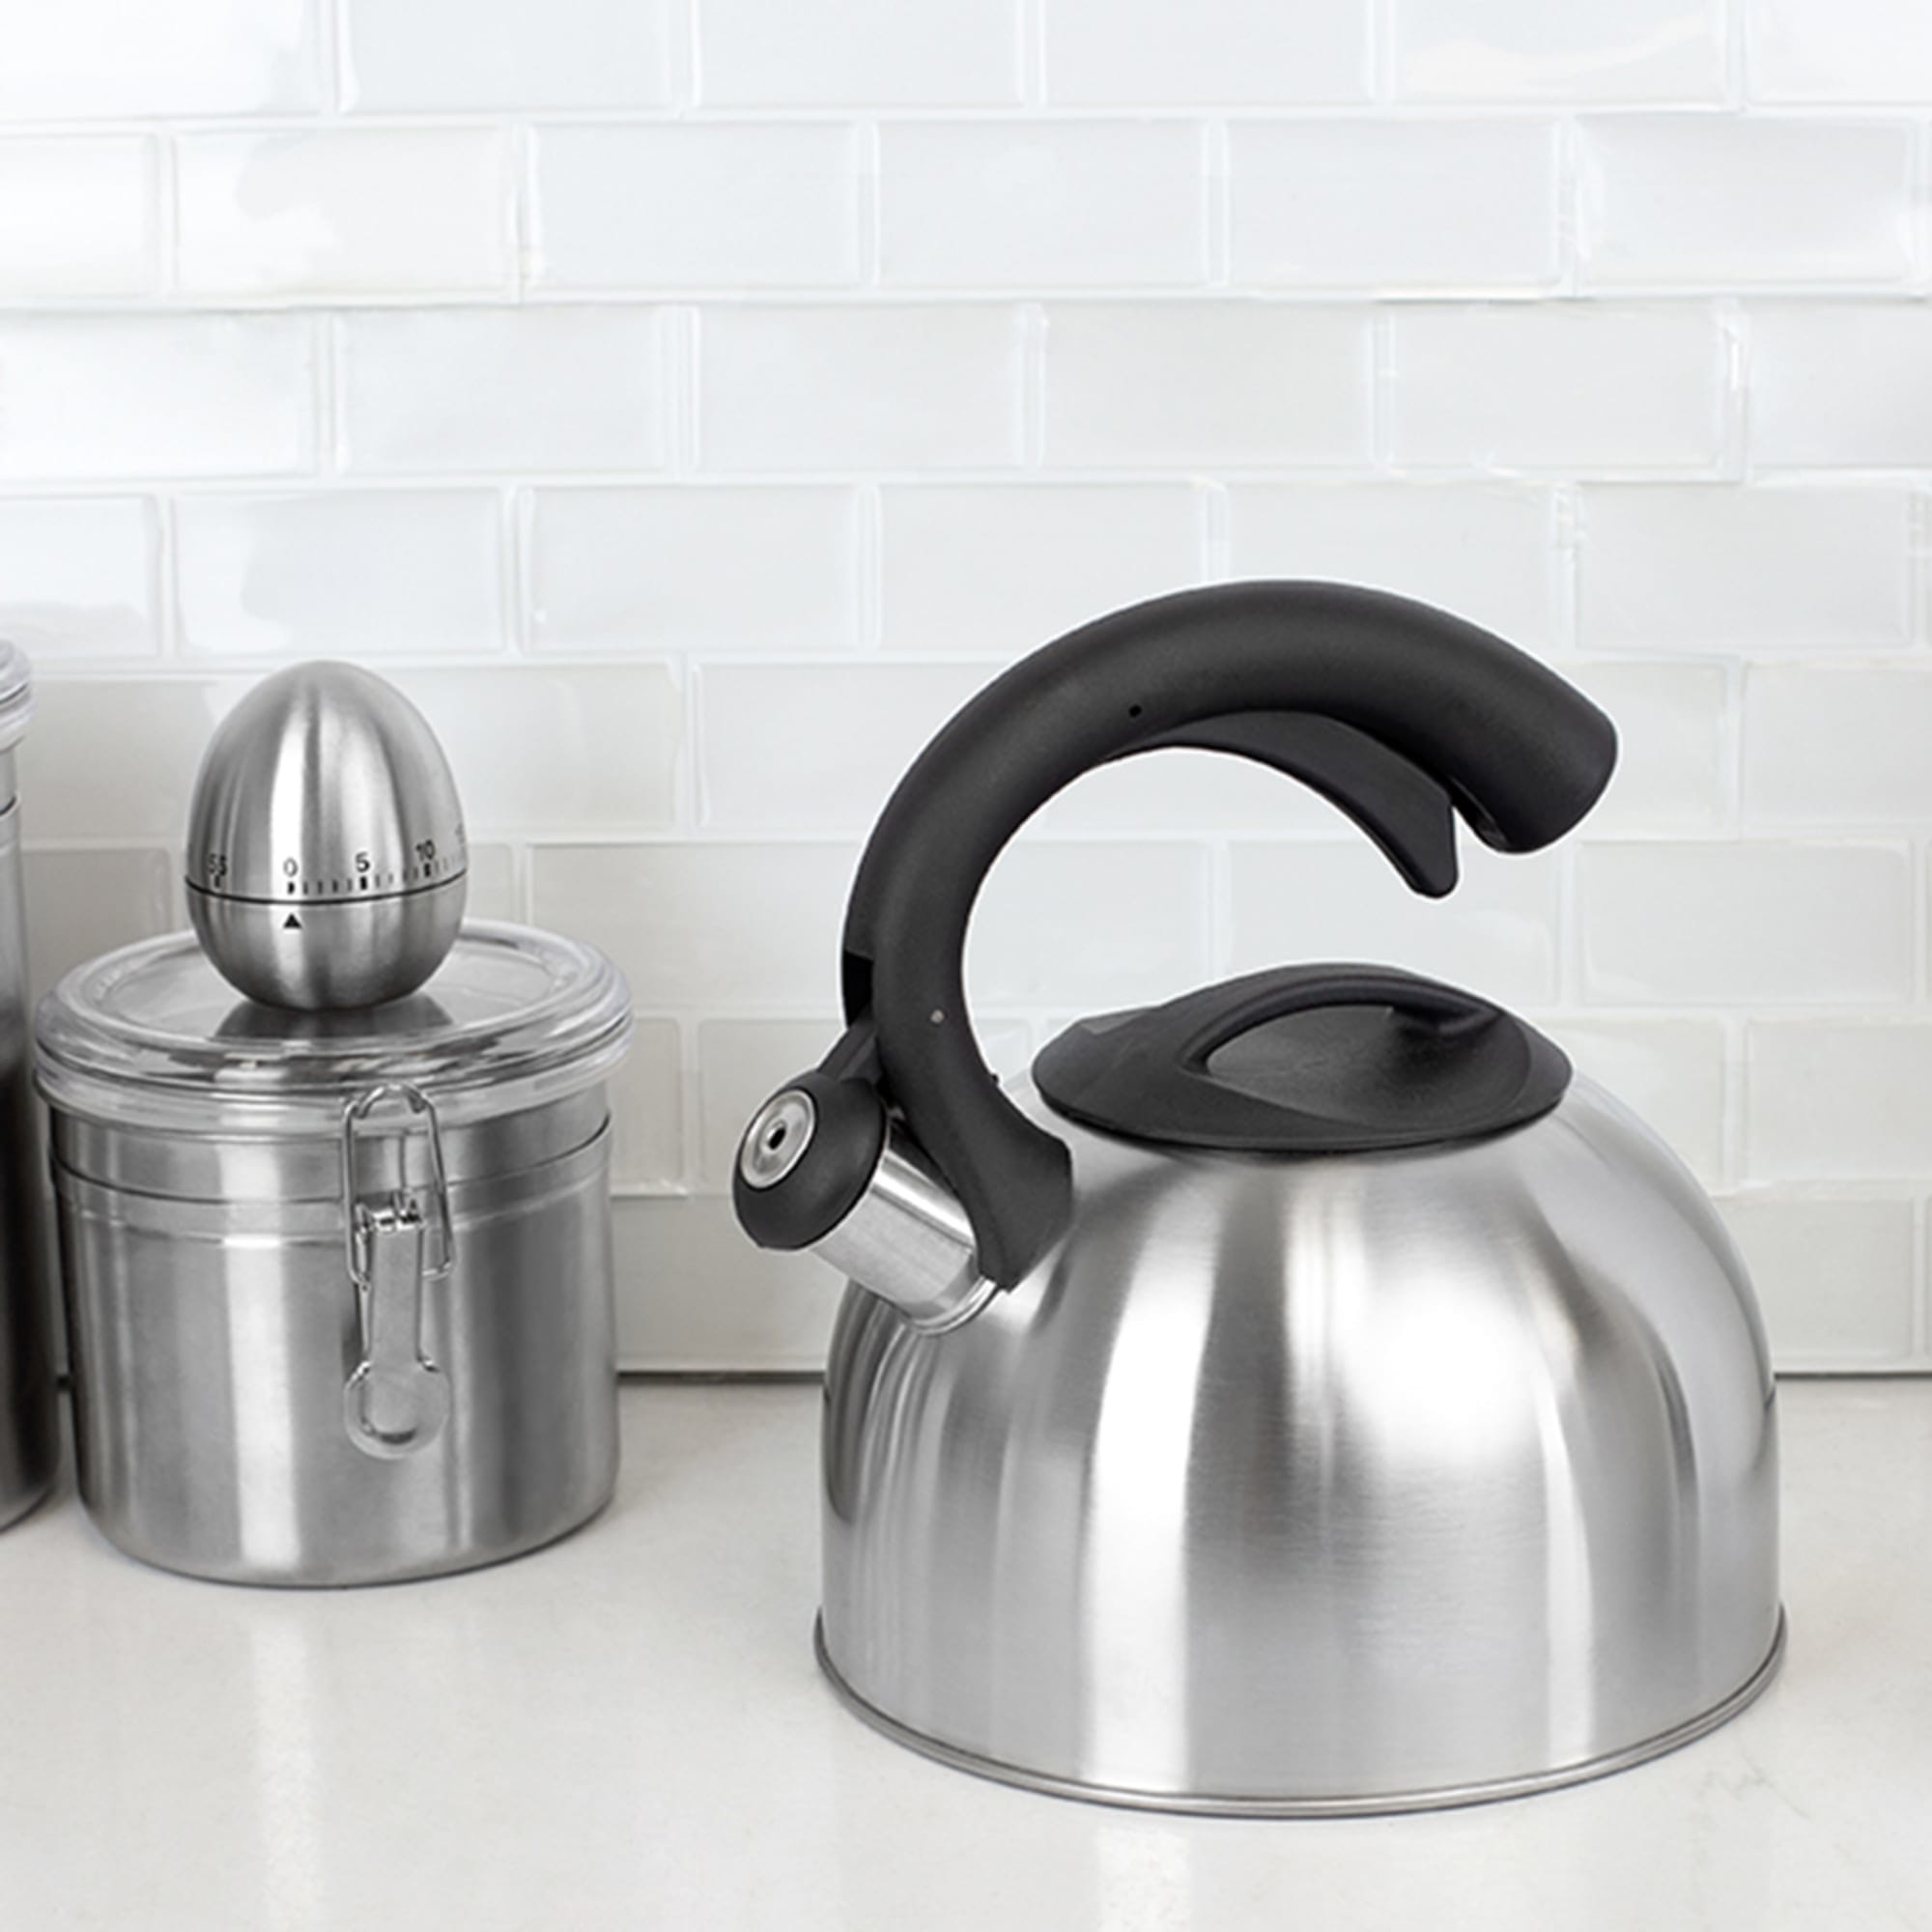 Home Basics 2.5 Liter Easy Pour Whistling Brushed Stainless Steel Tea Kettle, Silver $10.00 EACH, CASE PACK OF 6